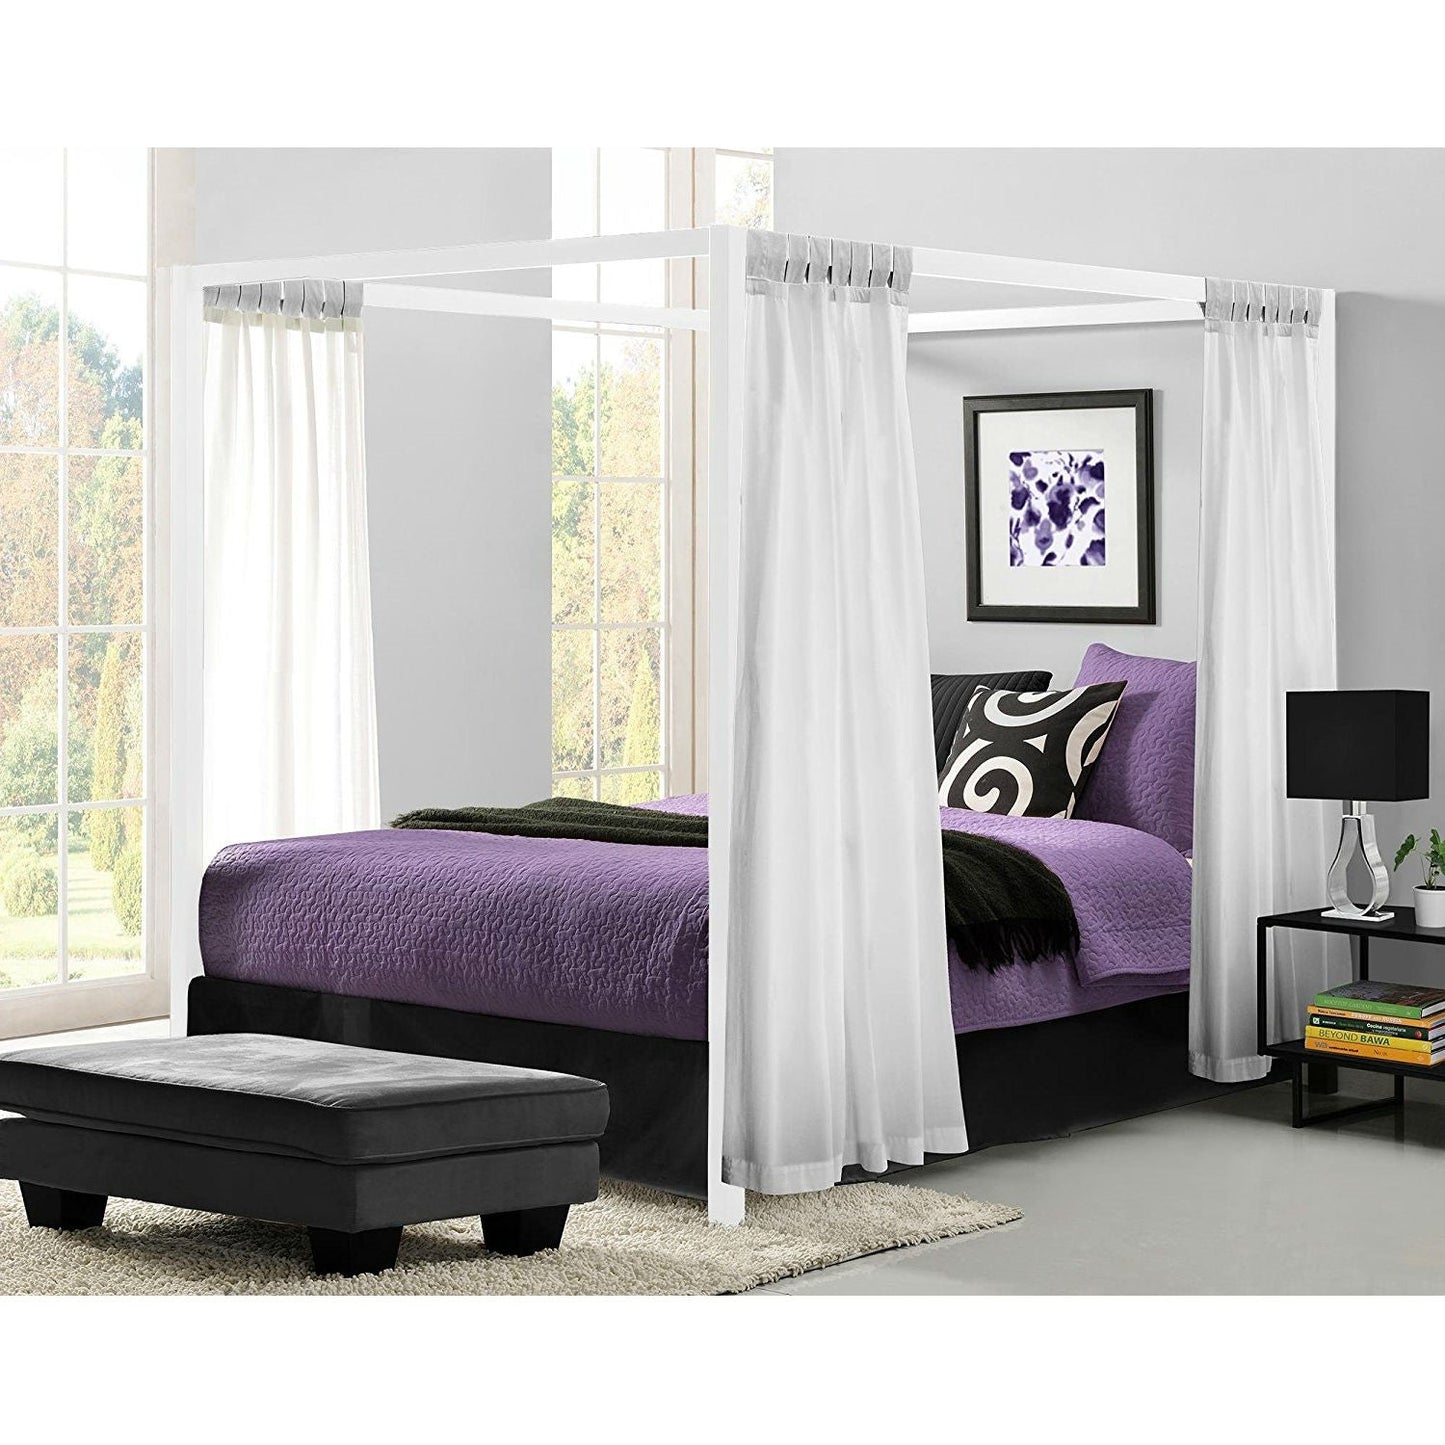 Bedroom > Bed Frames > Canopy Beds - Queen Size Sturdy Metal Canopy Bed Frame In White Finish